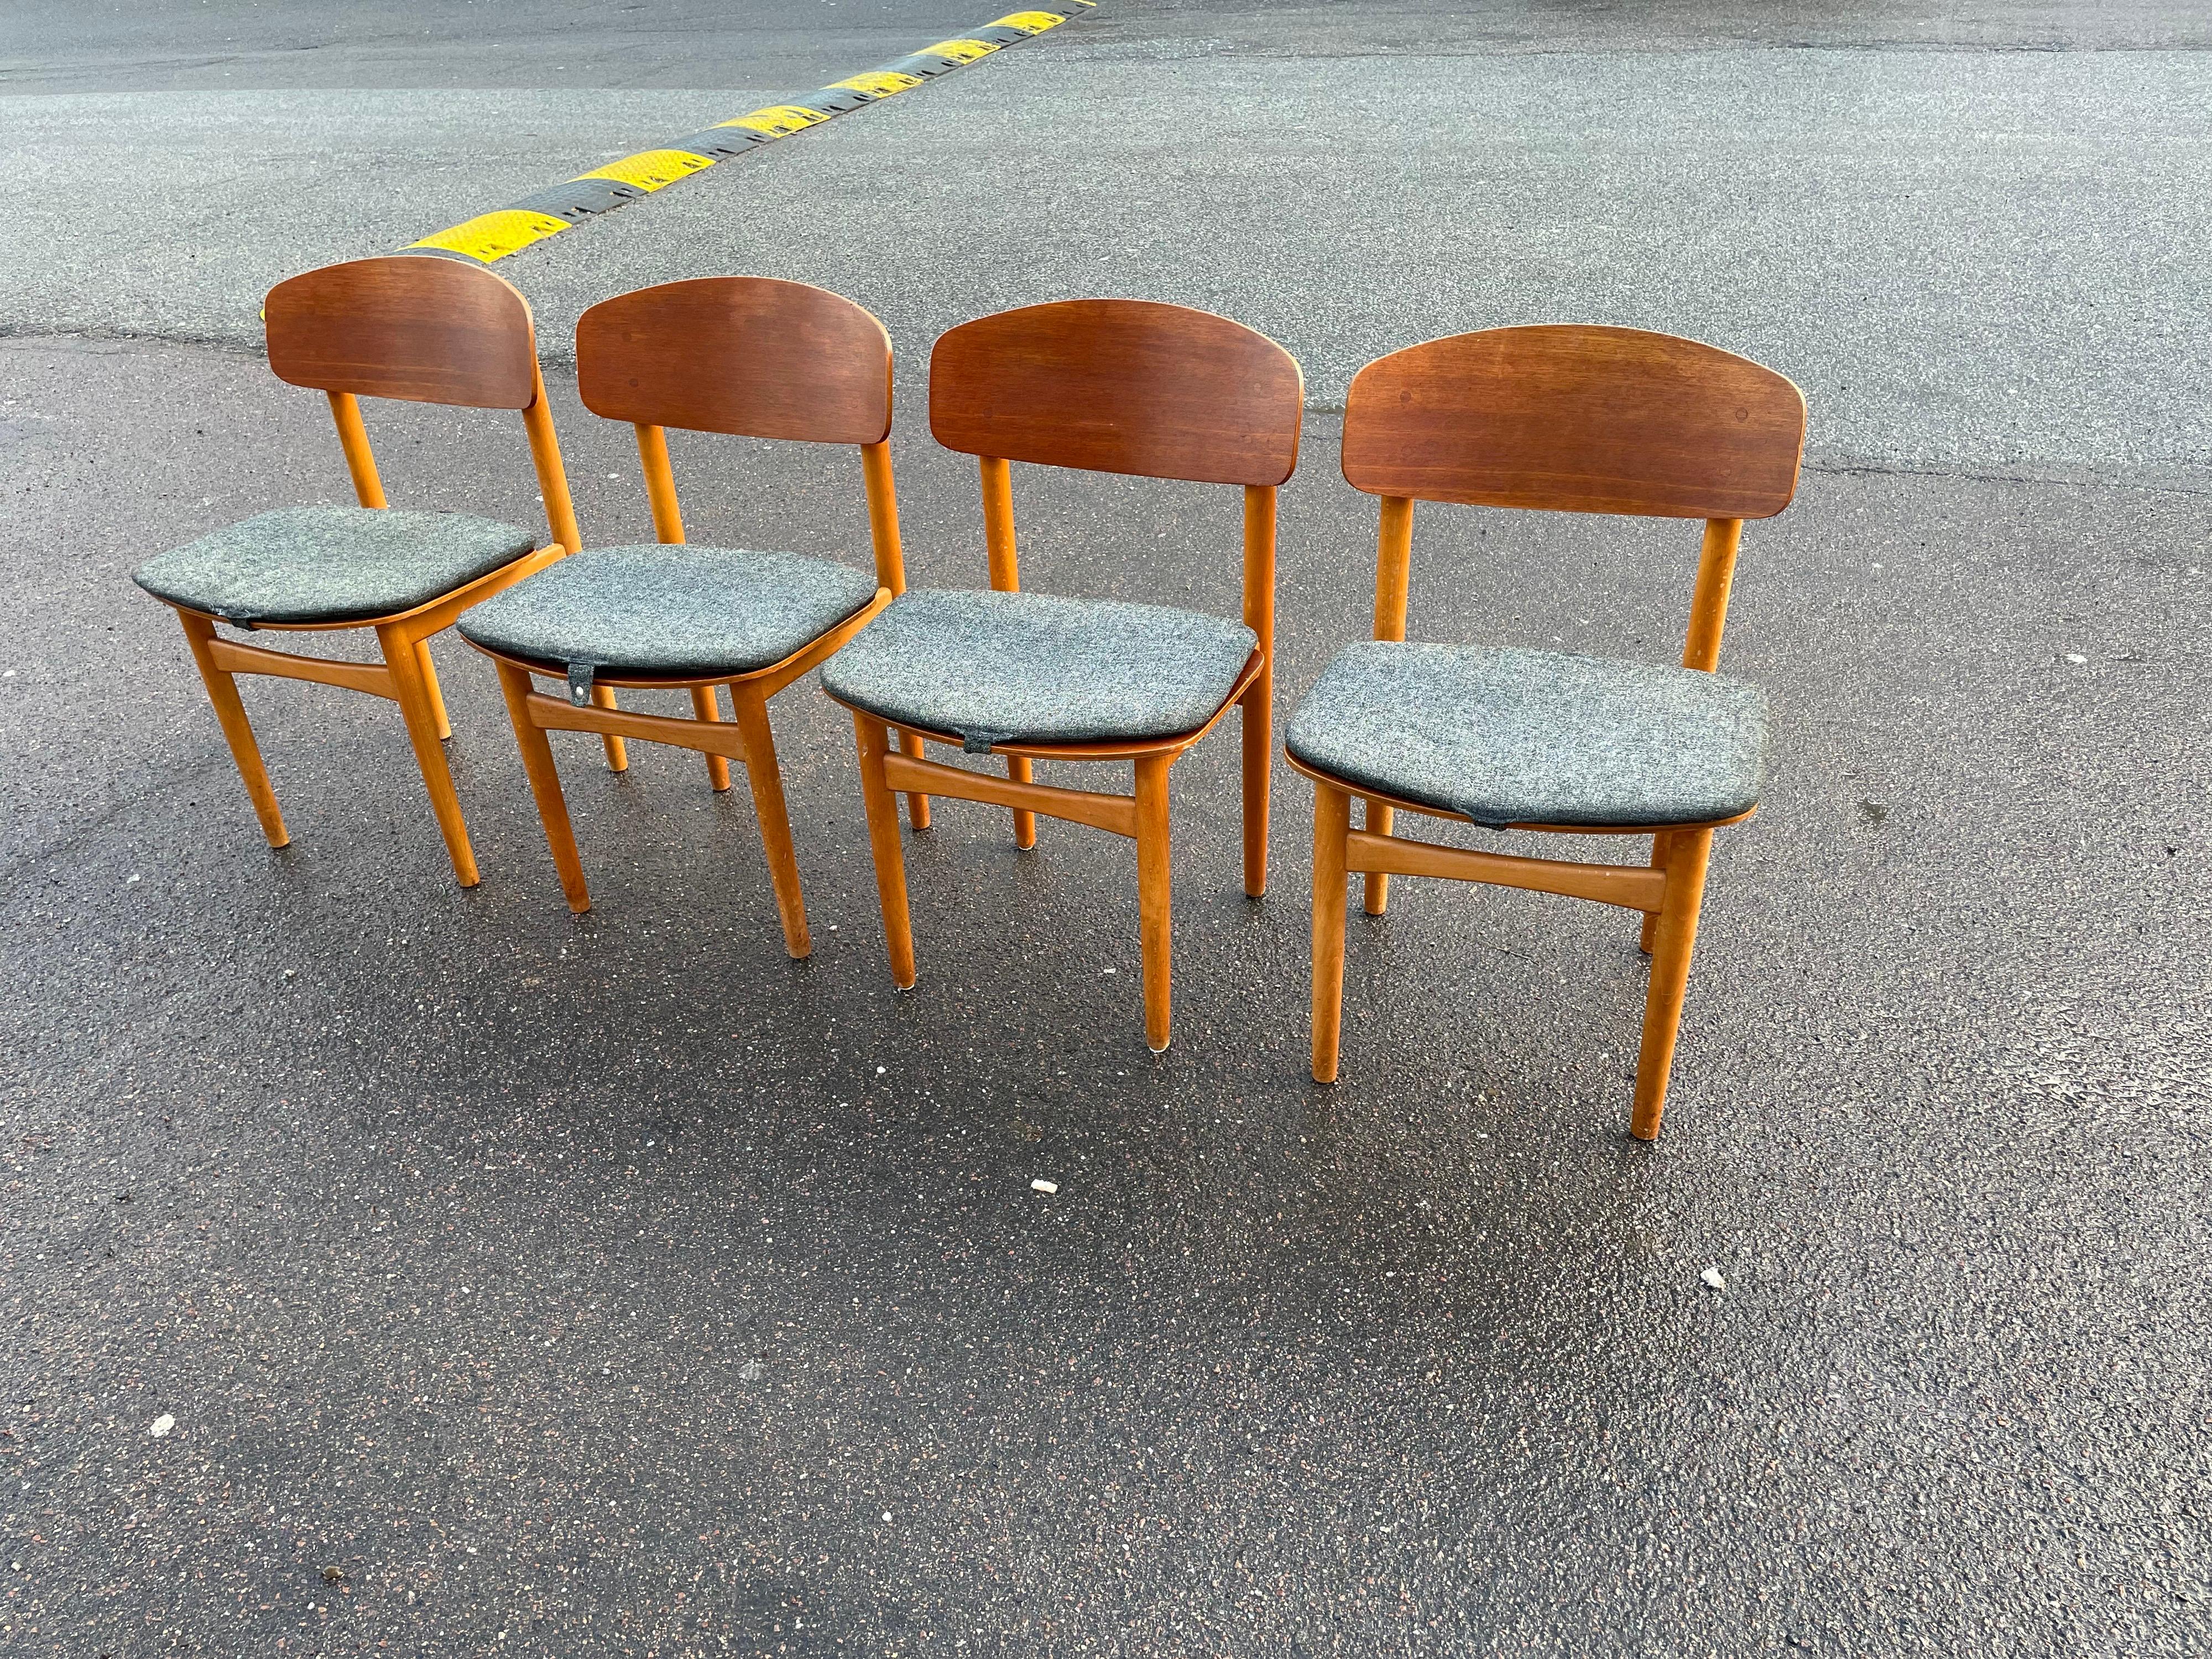 Among the great mid-20th century Danish furniture designers, Børge Mogensen distinguished himself with his faith to traditional values of craftsmanship and honesty of materials. This set of chairs contains that devotion of simple, exclusive and